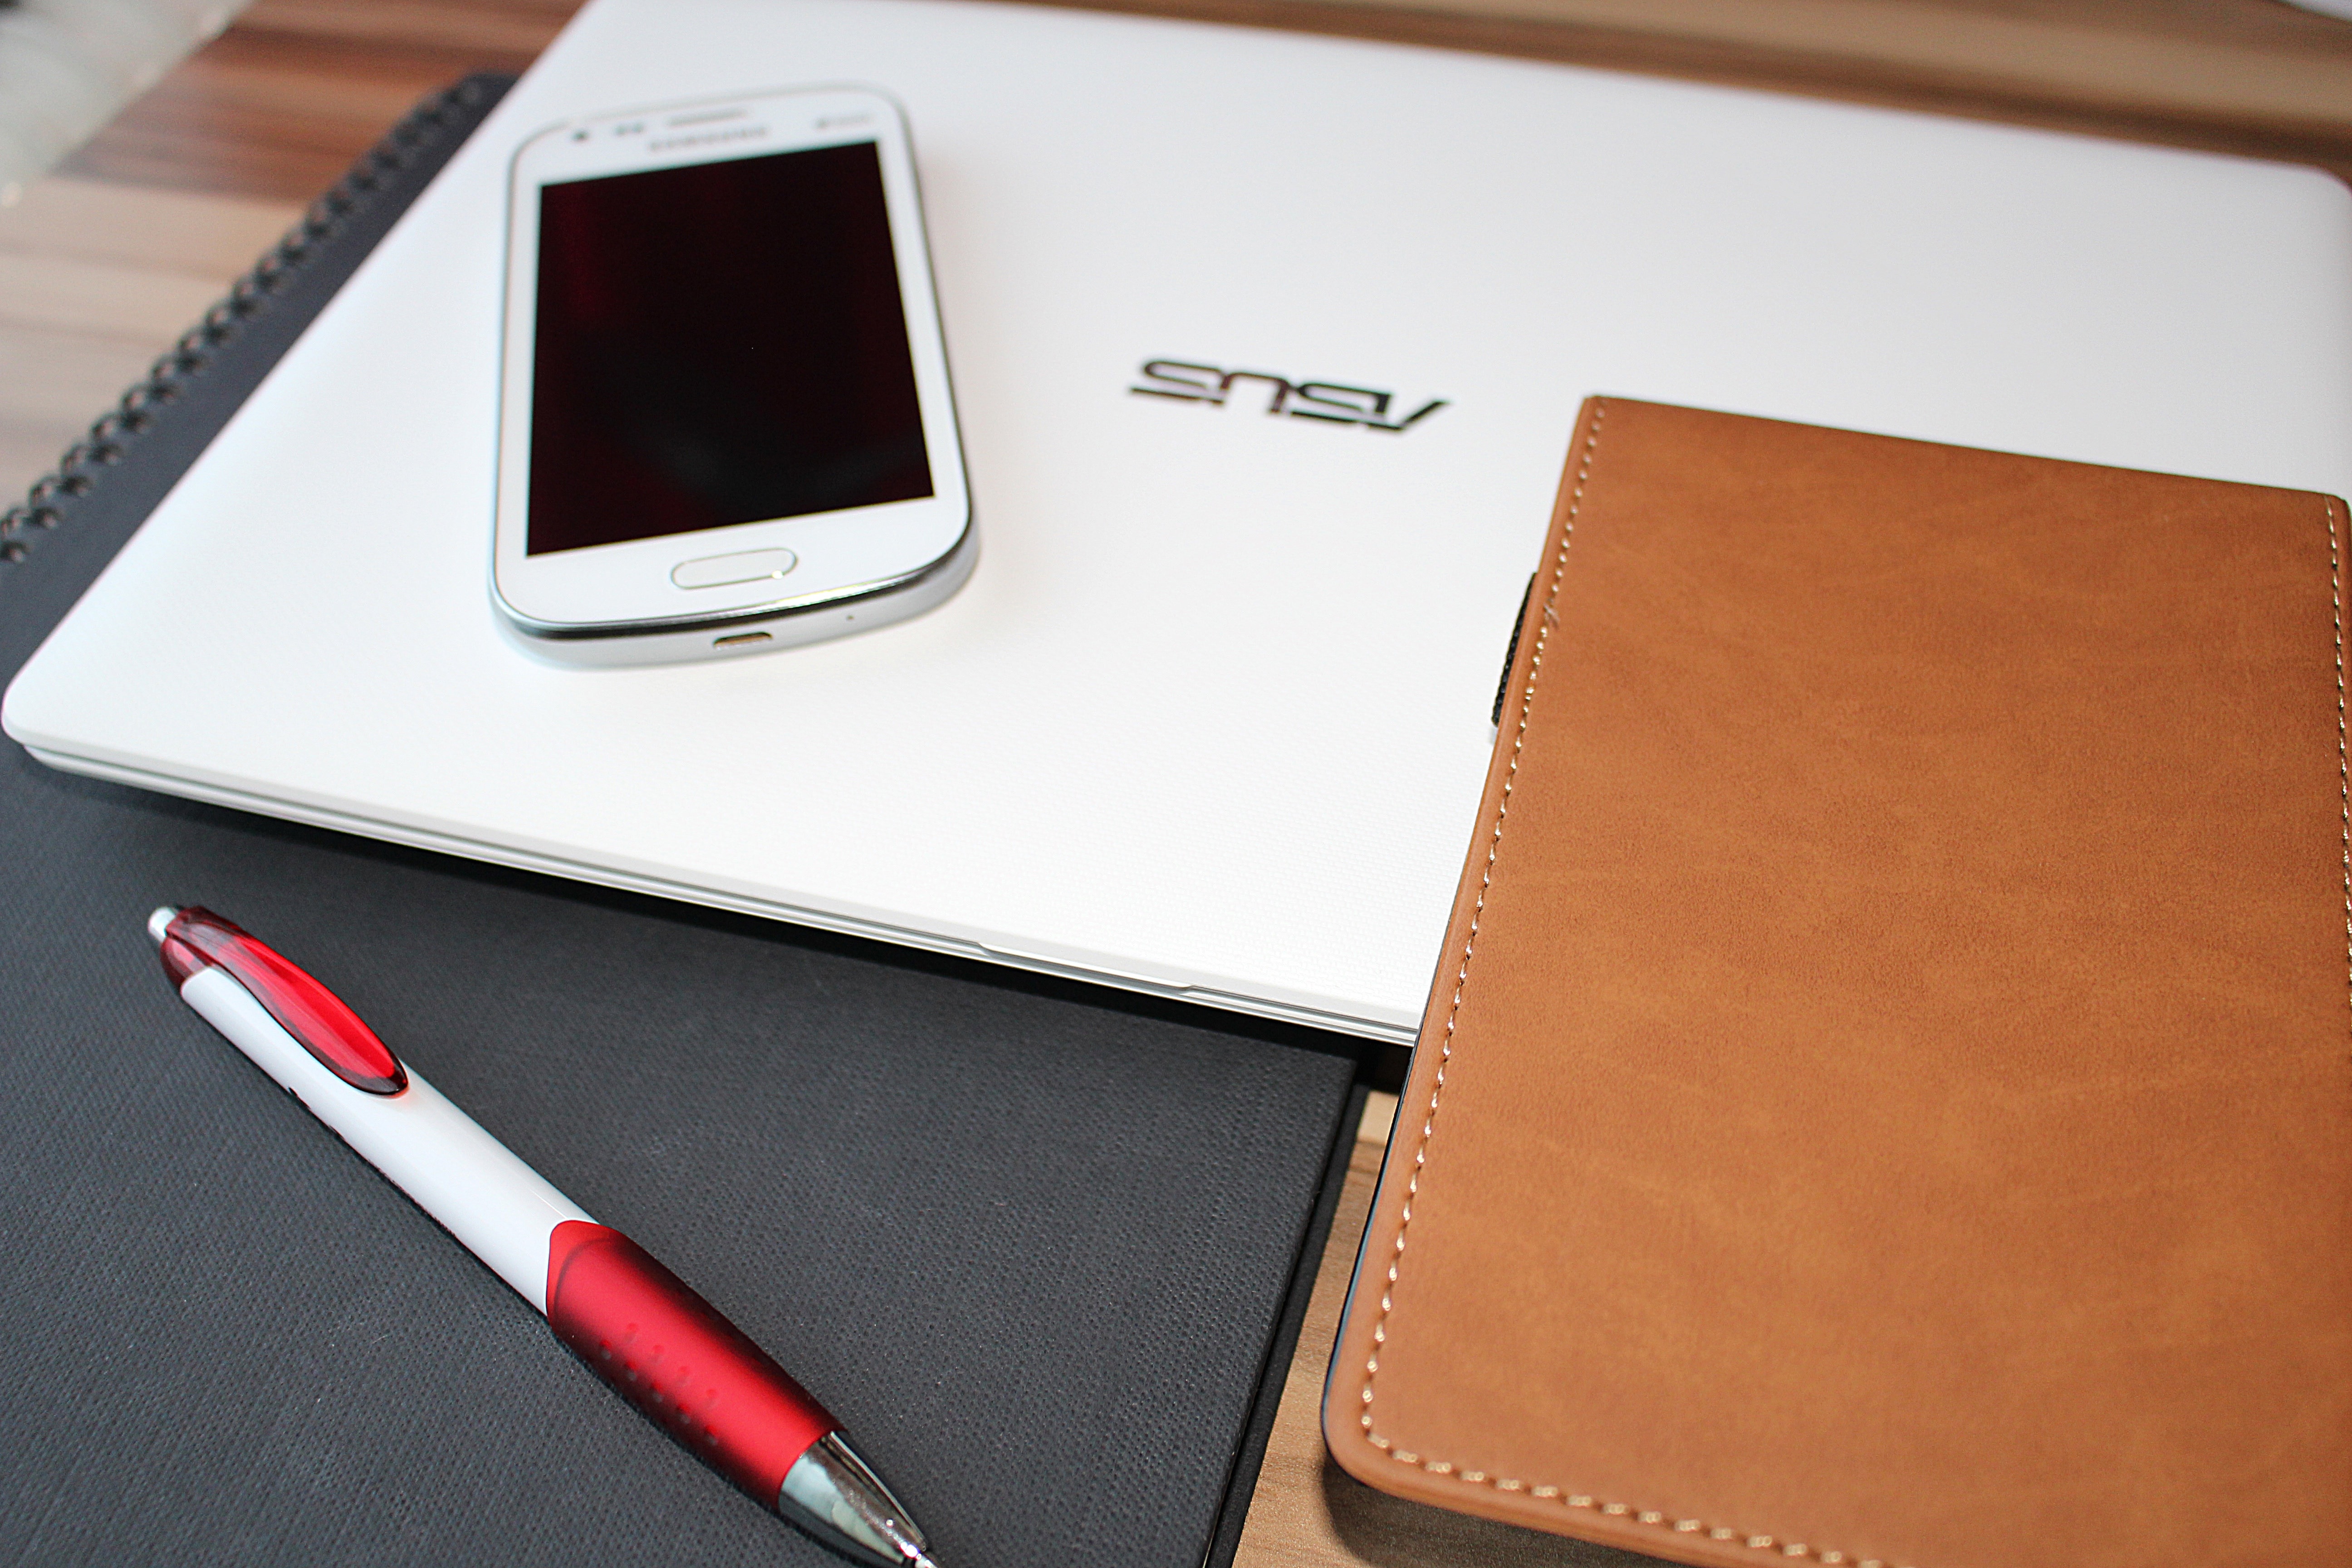 white and red click pen beside brown leather case and white android smartphone on white Asus laptop